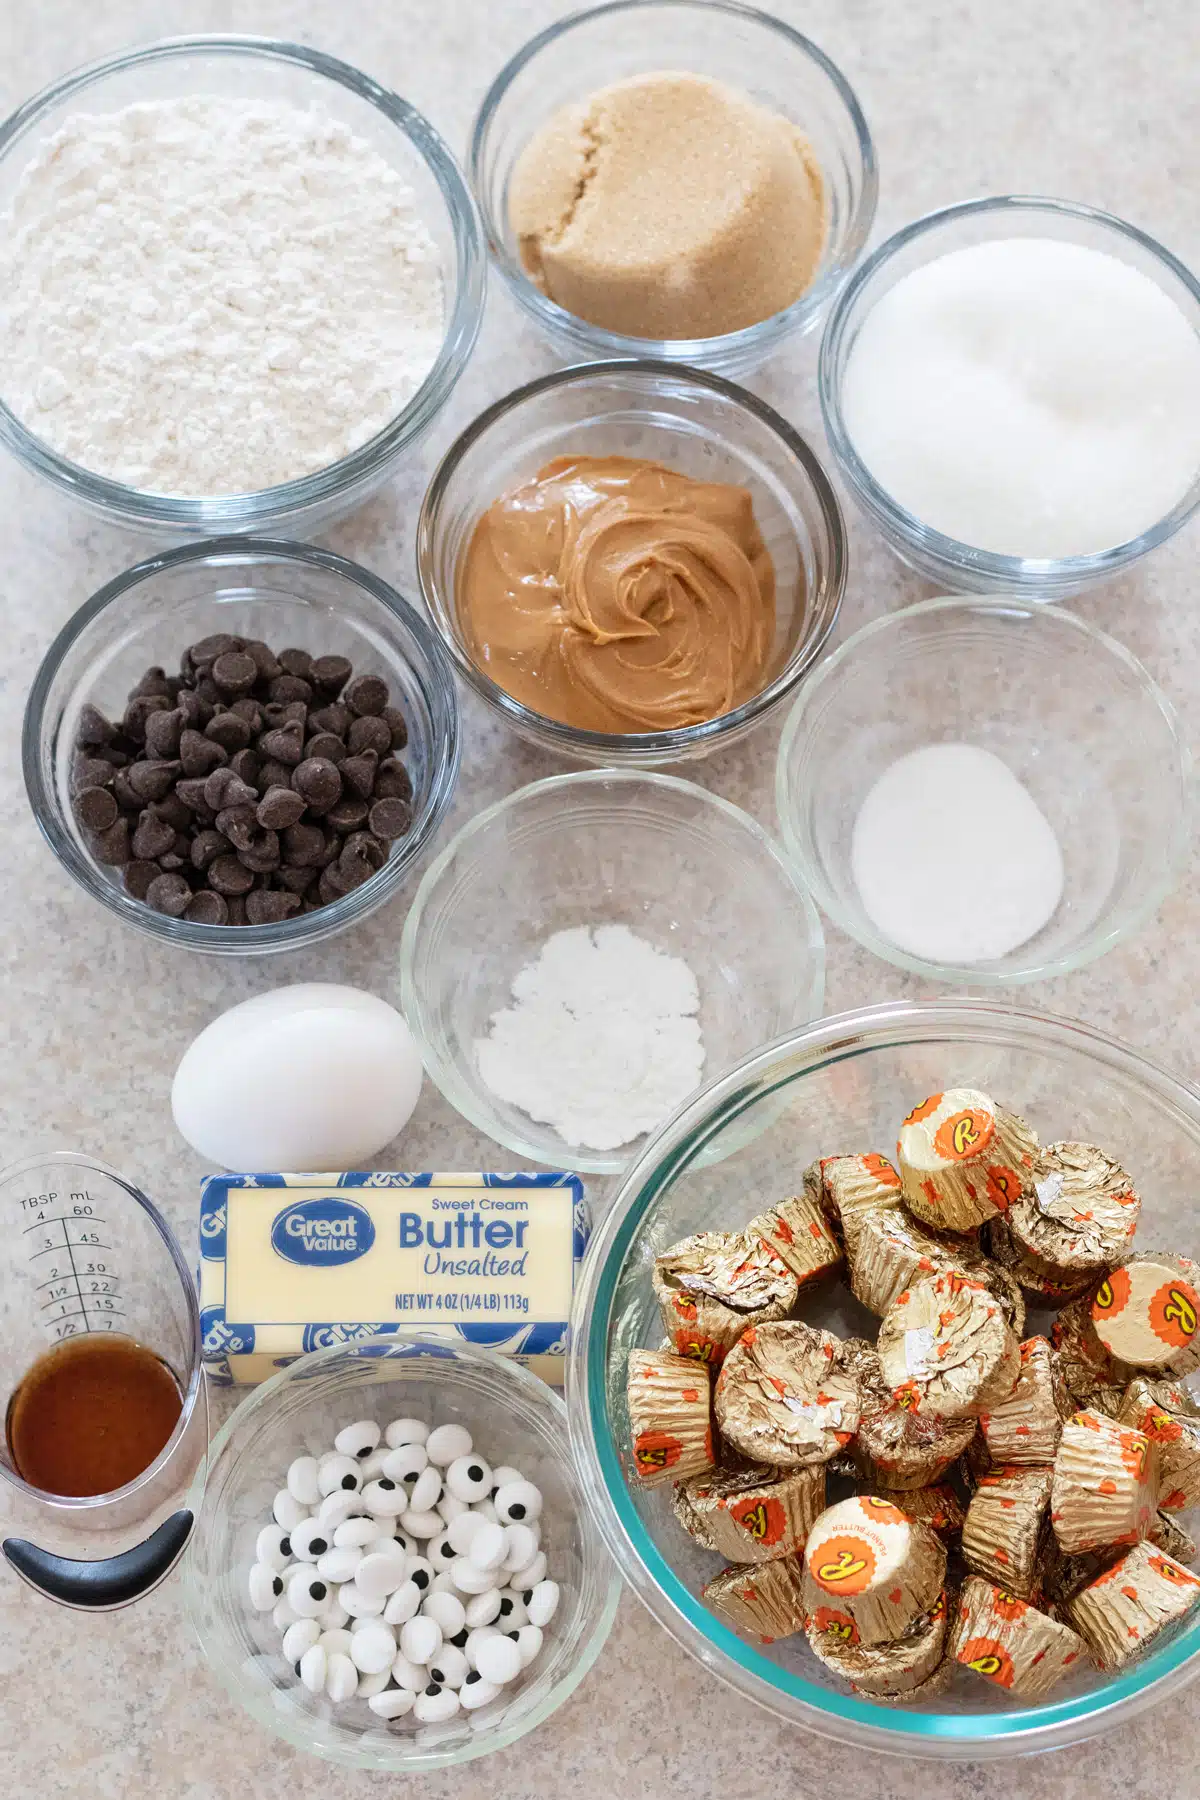 Tall image showing ingredients needed for Halloween peanut butter spider cookies.